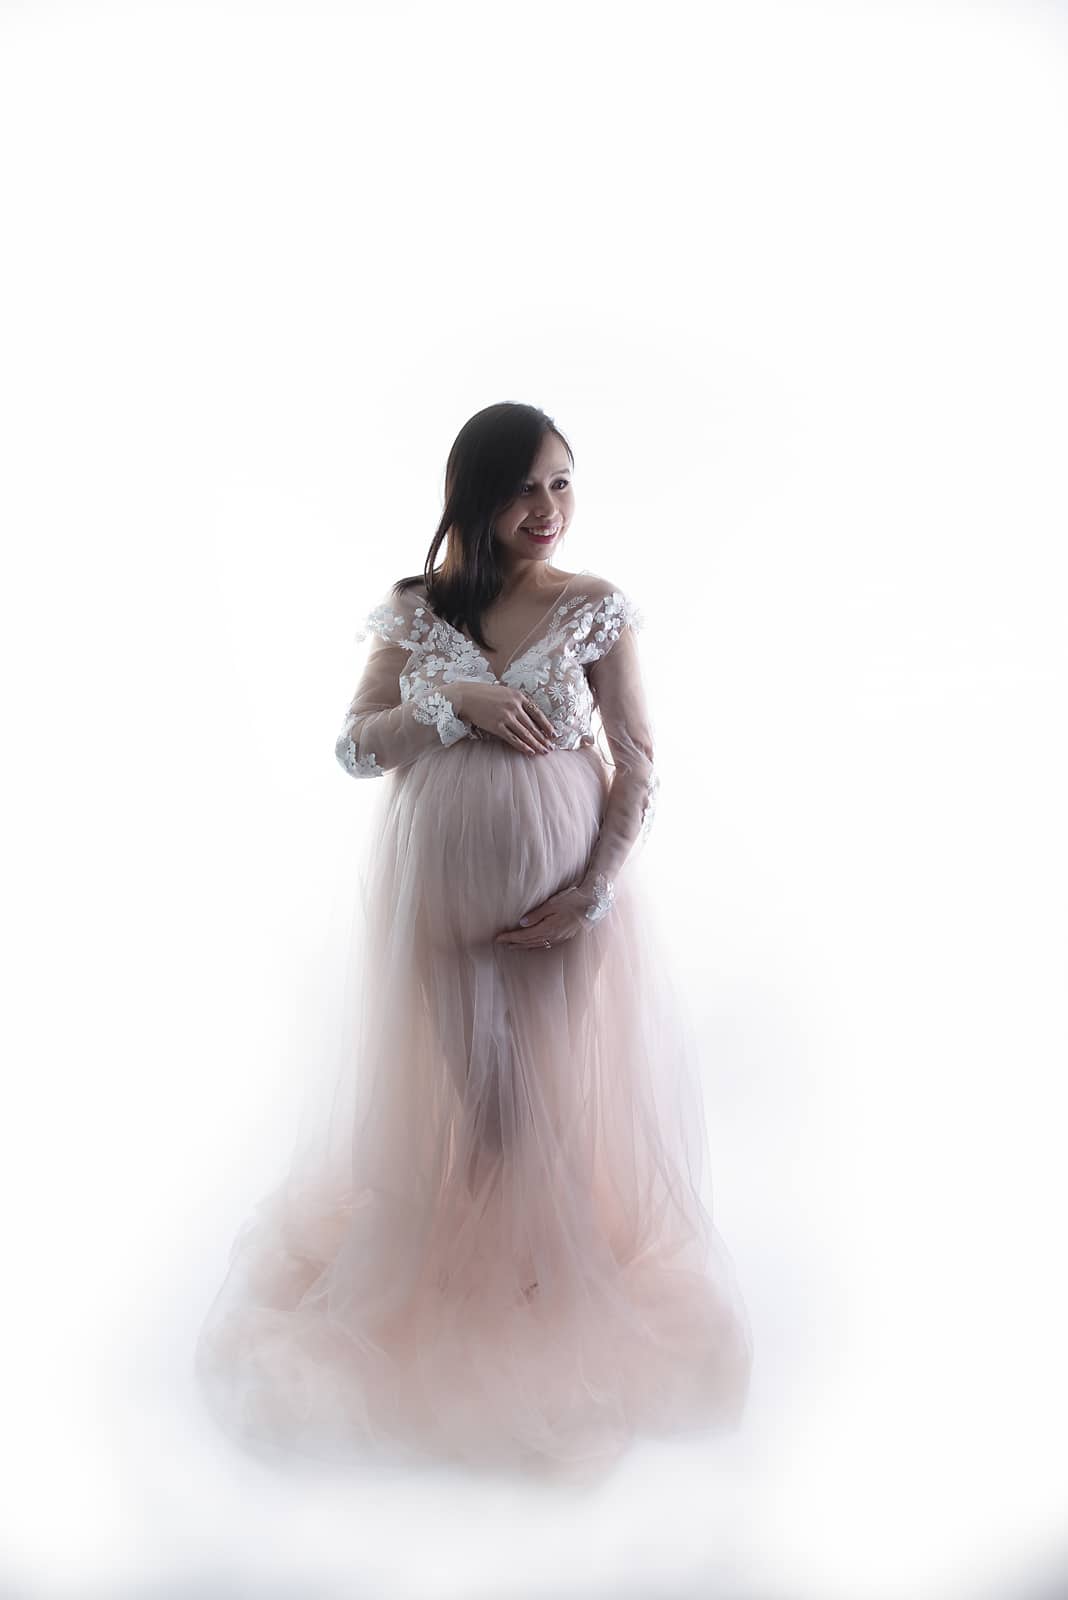 pregnancy photoshoot in a studio with white lace dress and white background photographed by Maternity Photographer Manchester